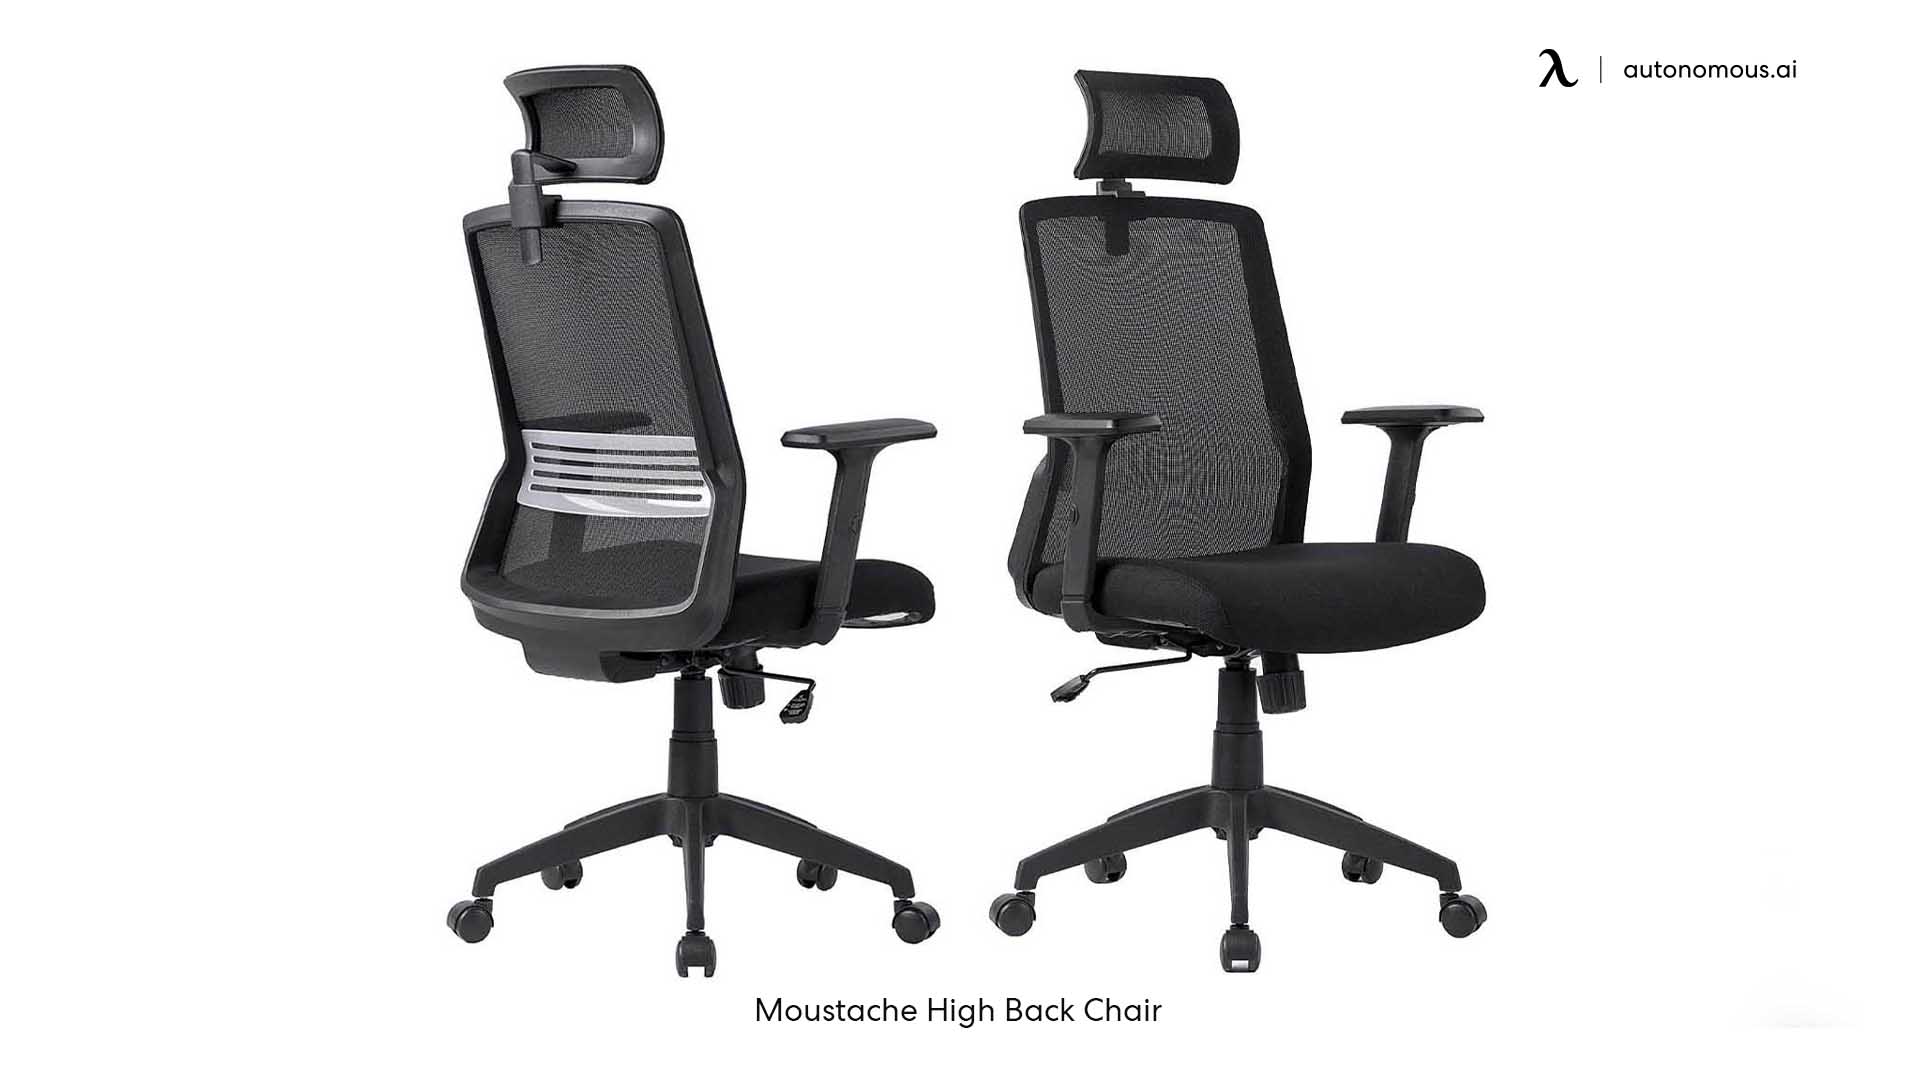 Moustache High Back Desk chair in Canada